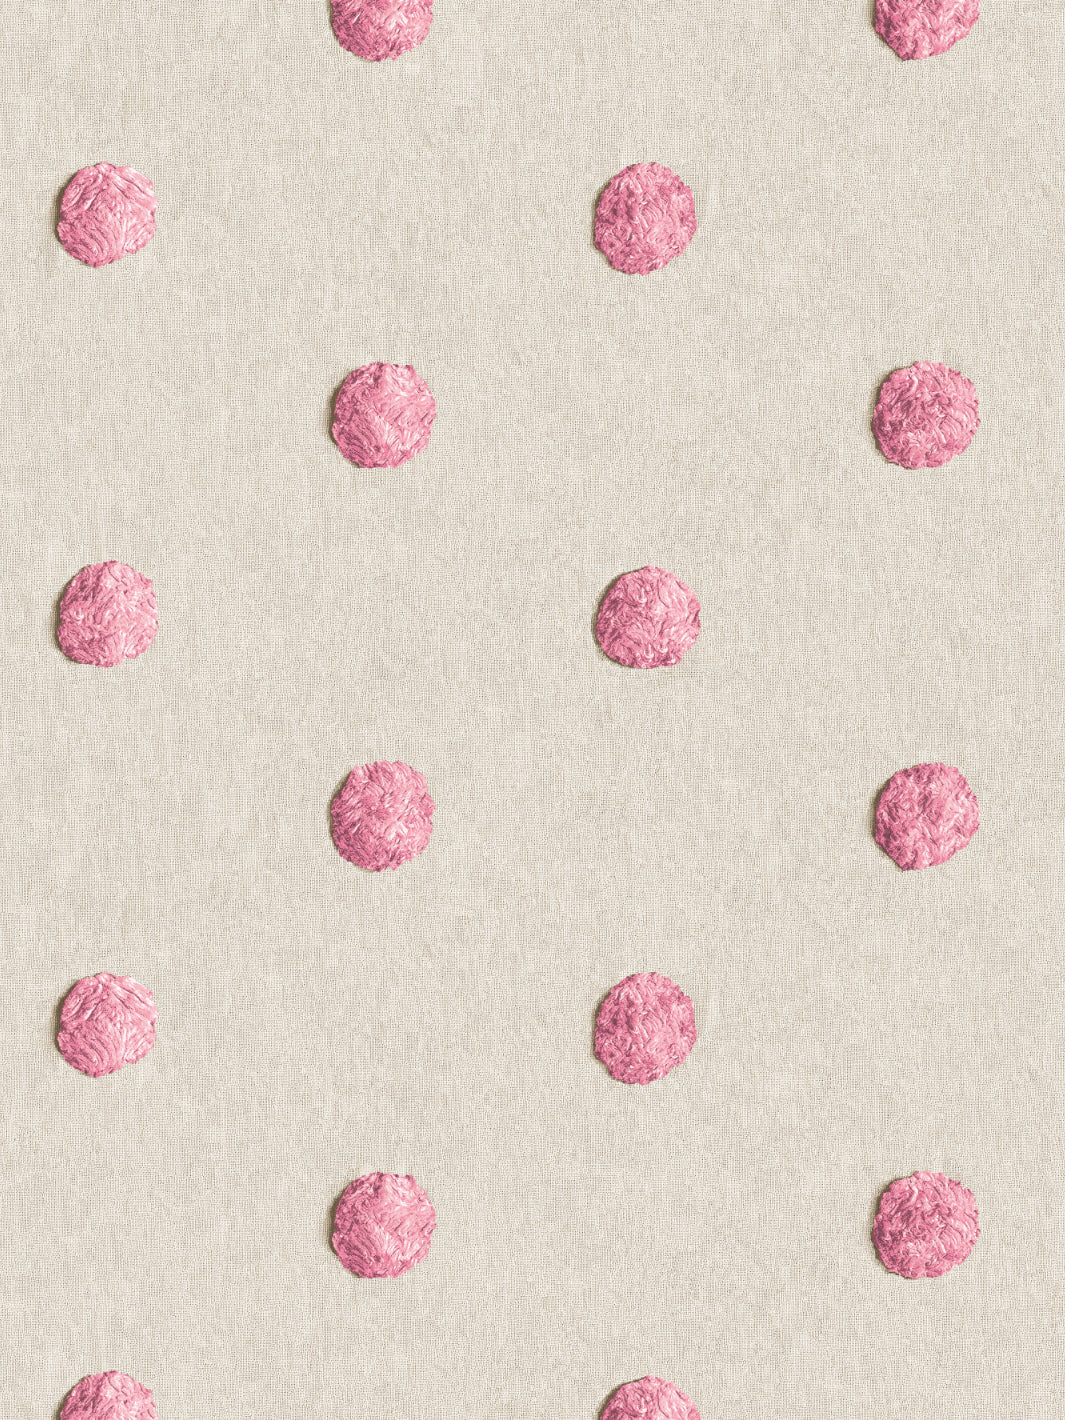 'Chenille Dots Small' Wallpaper by Chris Benz - Pink